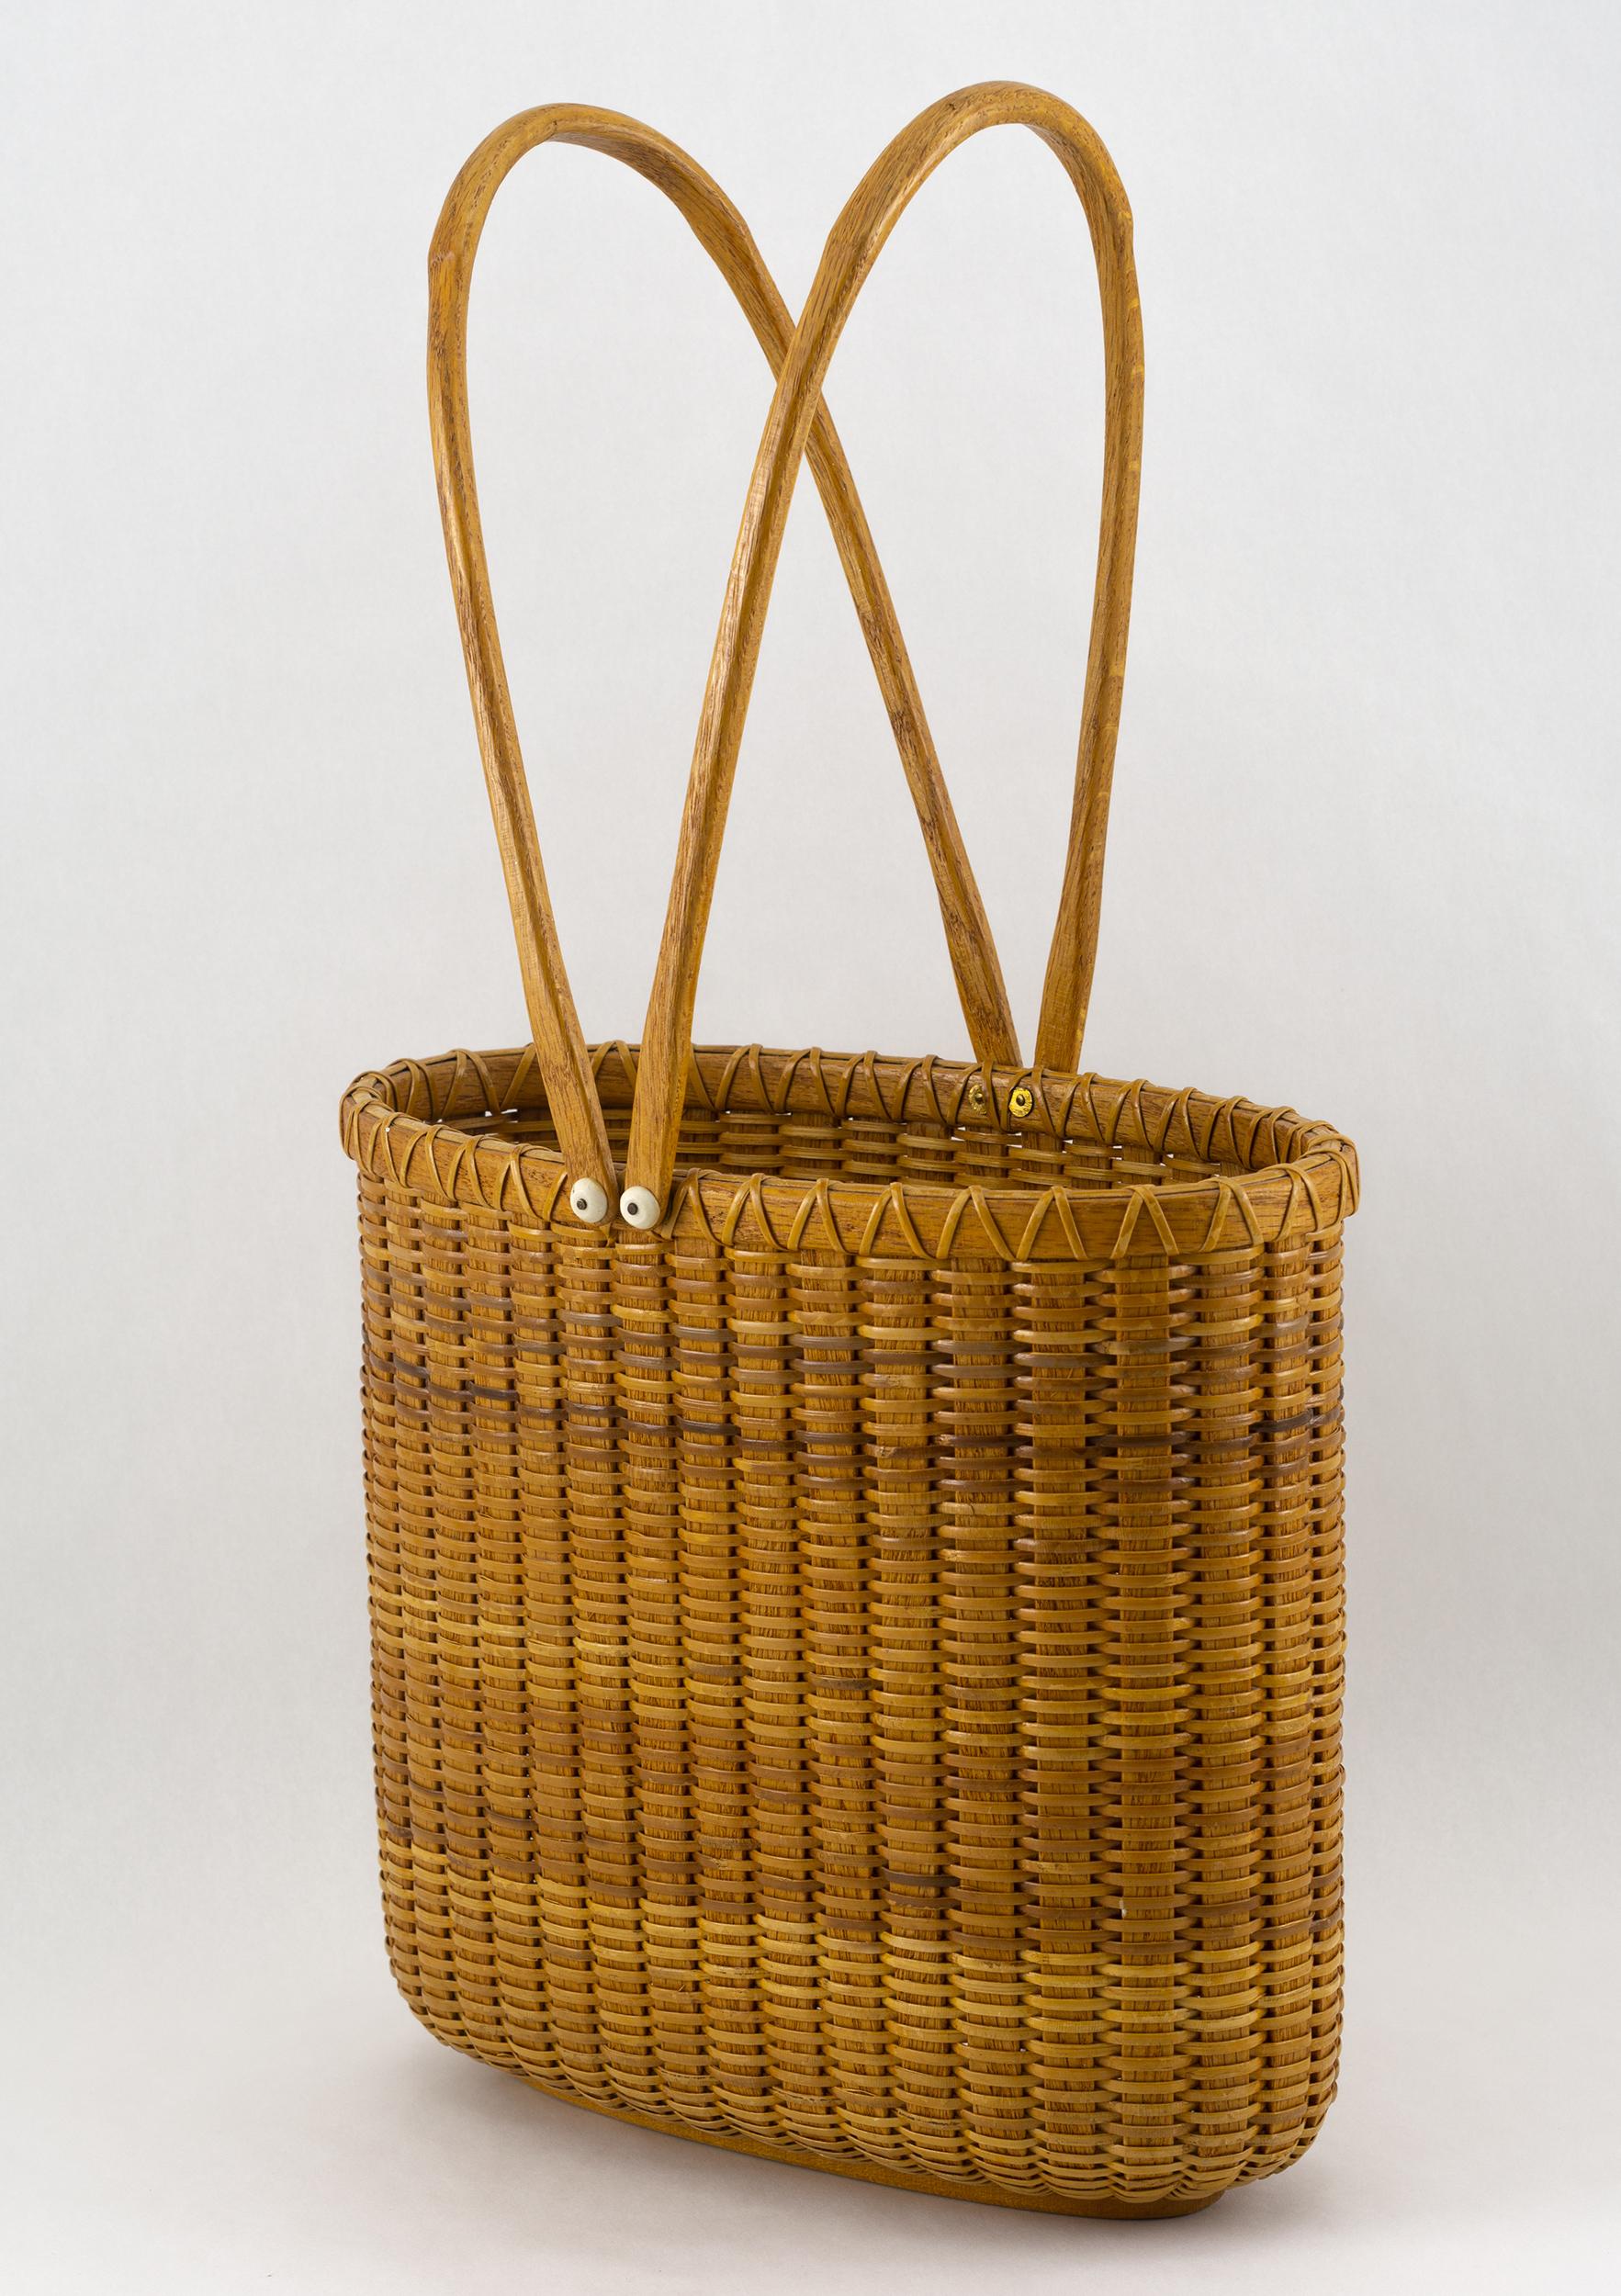 The basket has two oak swing handles 
with oak staves and pine bootom
Signed and dated Willer, circa 1982.
Made by Paul Willer, born 1930
Measures: 9” x 9” x 5”.
 
 